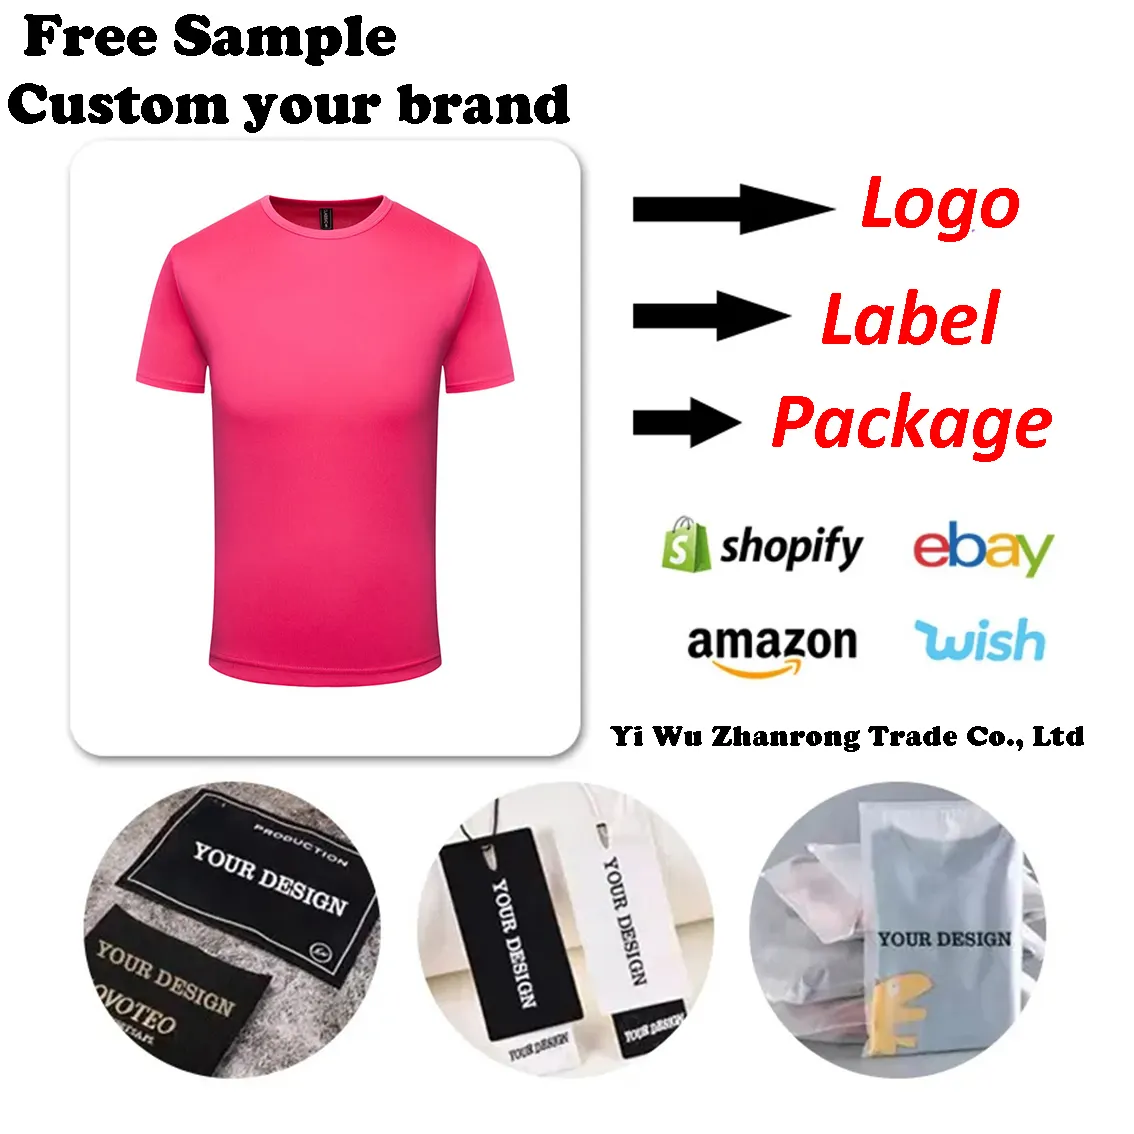 Premium 180gsm-300gsm Plain Polyester T shirt Gym Jogging Fast Dry T shirts Blank Oversize Heavy Weight Custom T-shirts for Men